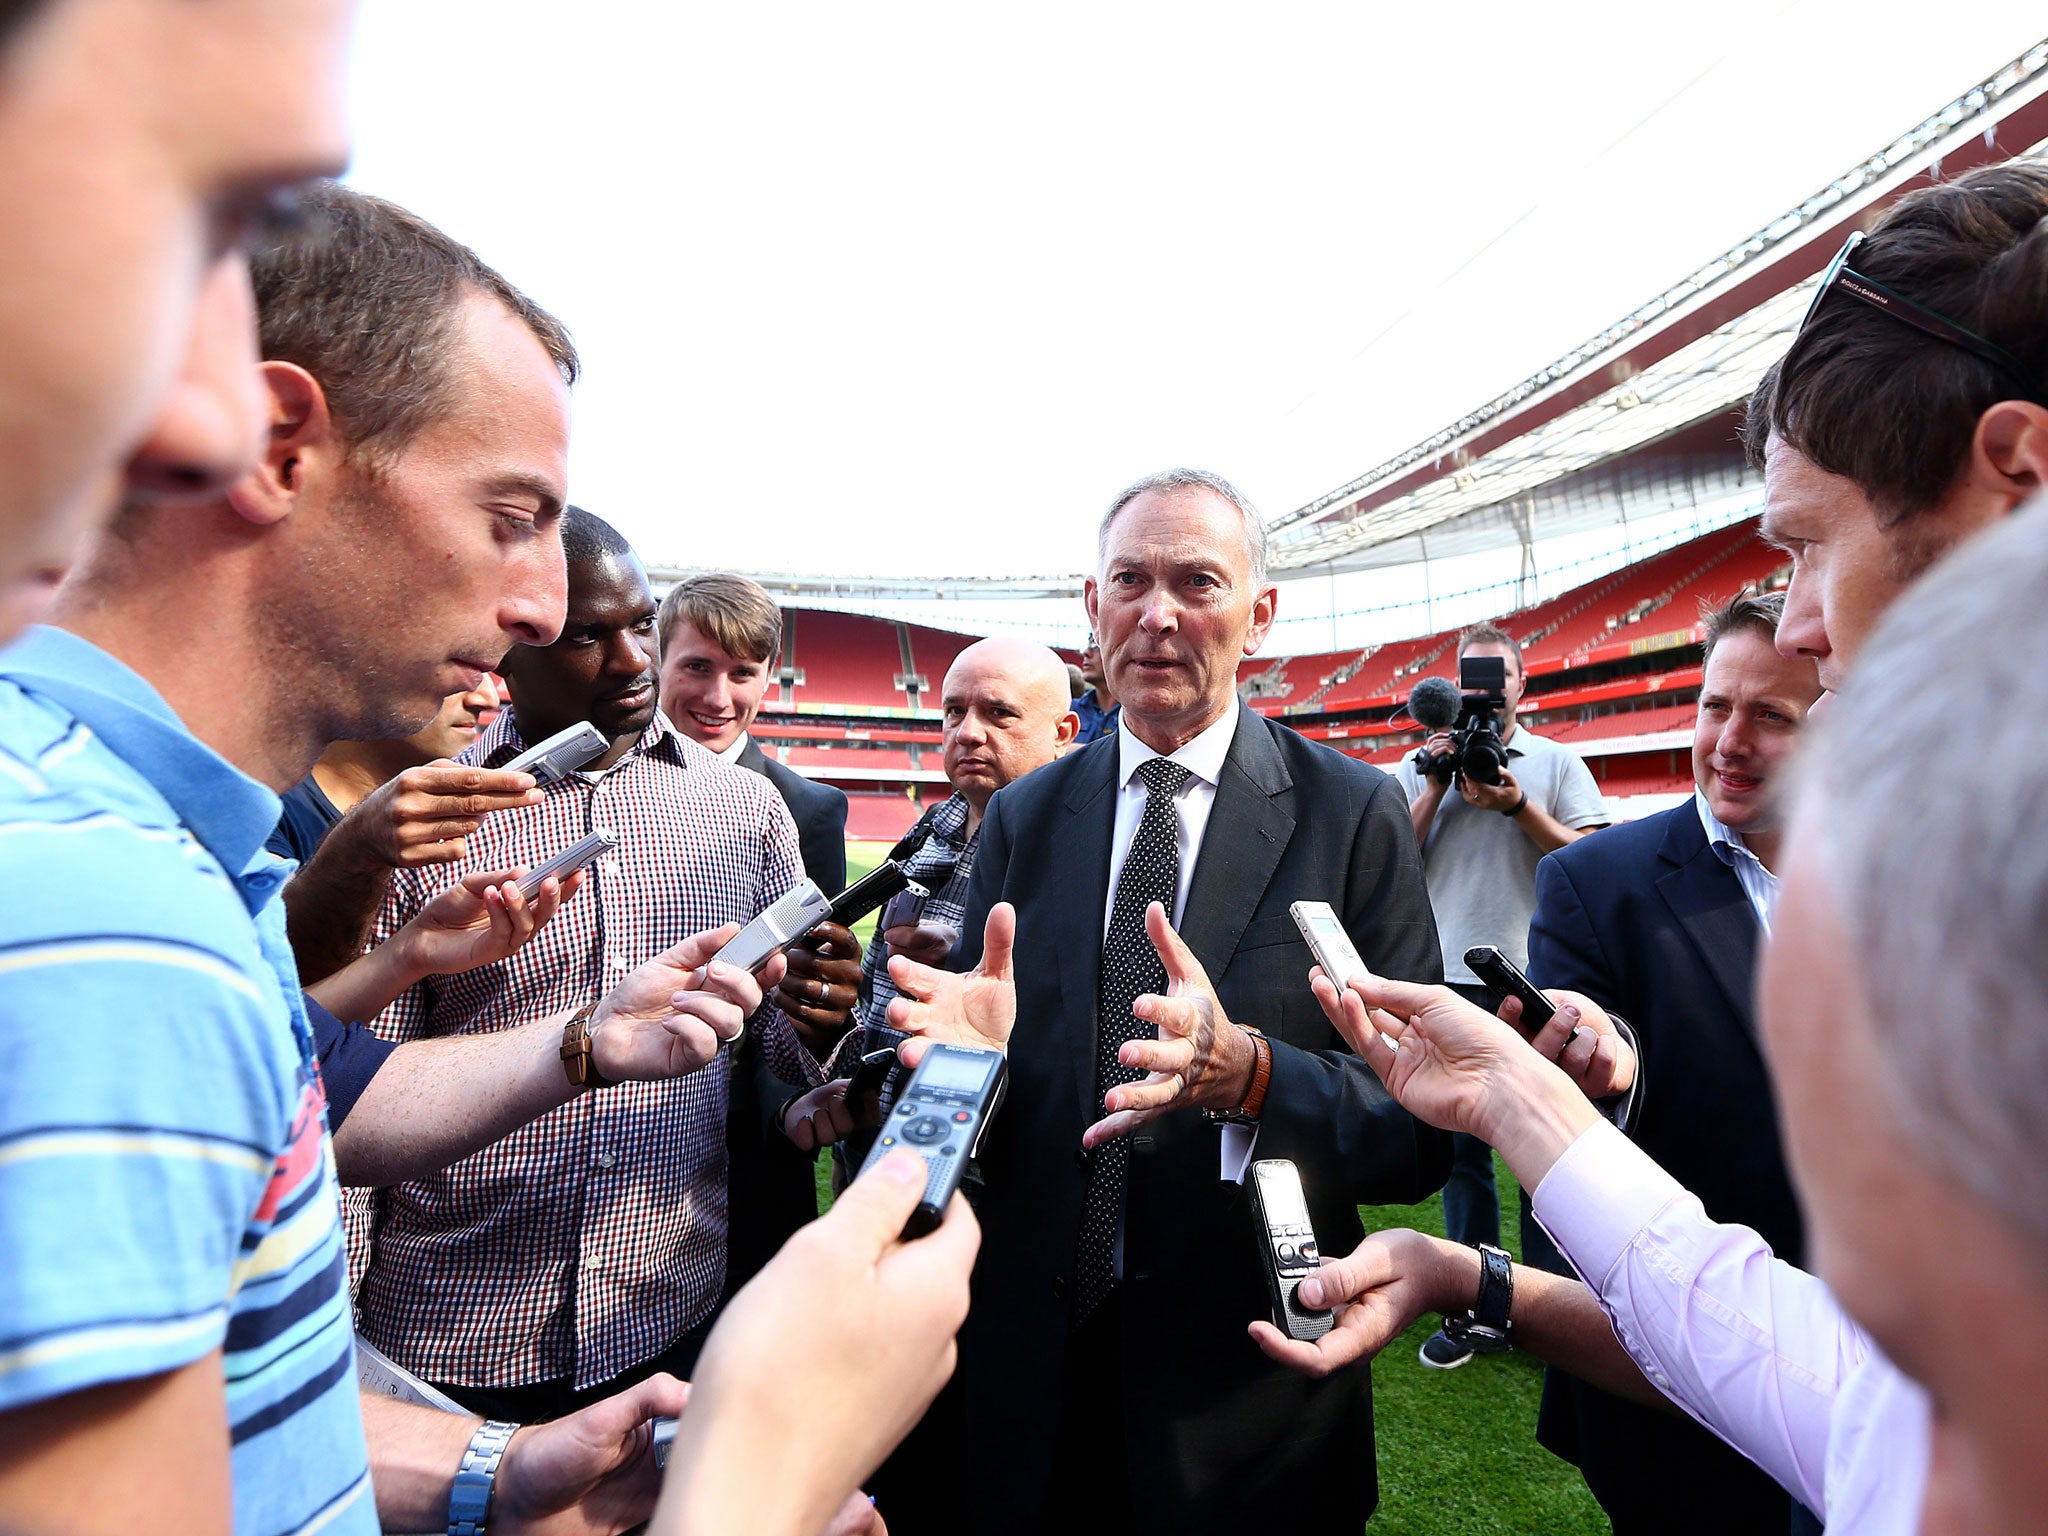 Premier League chief executive Richard Scudamore, who is under pressure to resign over emails leaked by his former PA